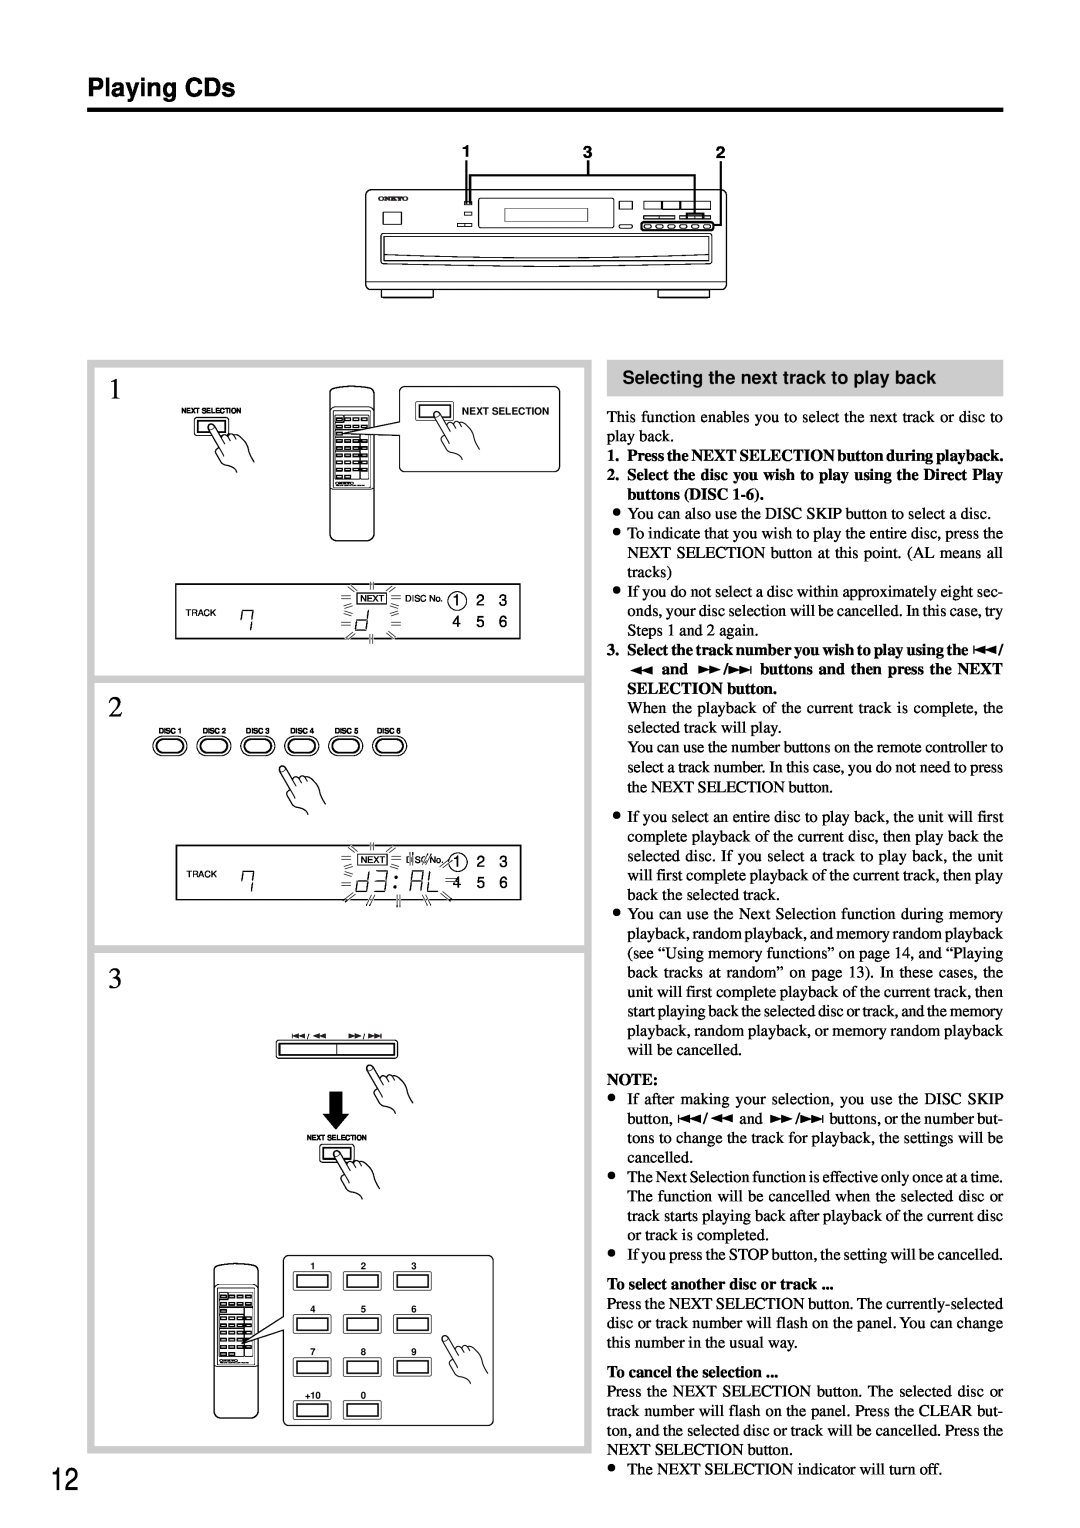 Onkyo DX-C380 instruction manual Playing CDs, Selecting the next track to play back 